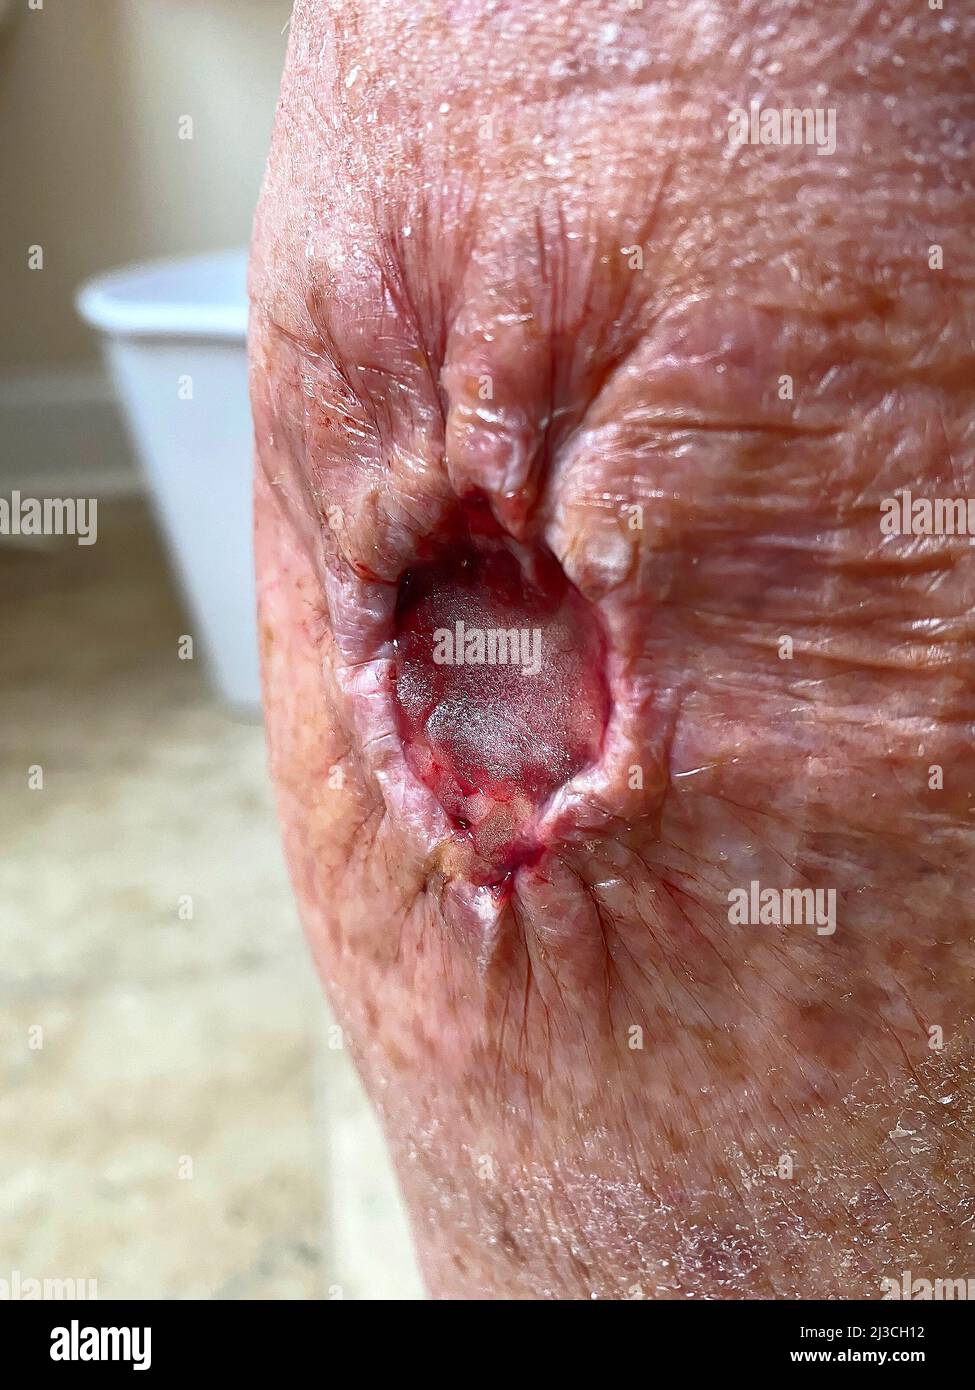 open leg wound, after Mohs surgery, remove squamous cell carcinoma, purse string sutures, cavity, skin, sutures, medical, MR Stock Photo